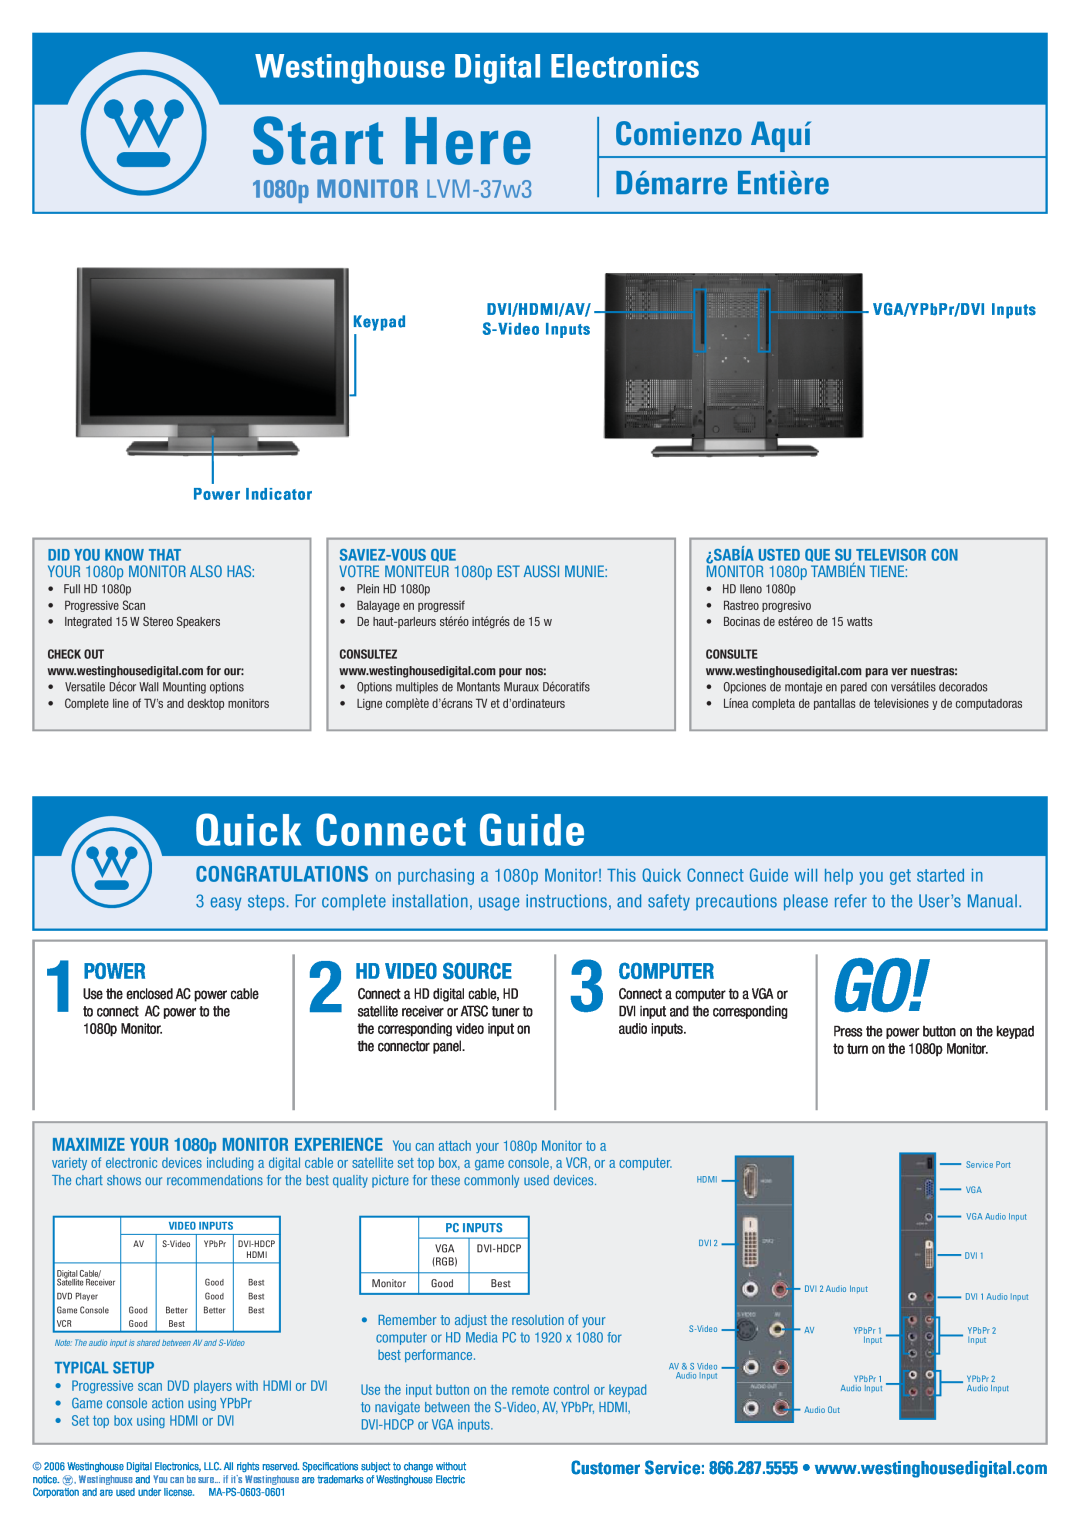 Westinghouse 1080p user manual Quick Connect Guide, 1POWER, Computer, Hd Video Source, Keypad, Dvi/Hdmi/Av, Typical Setup 